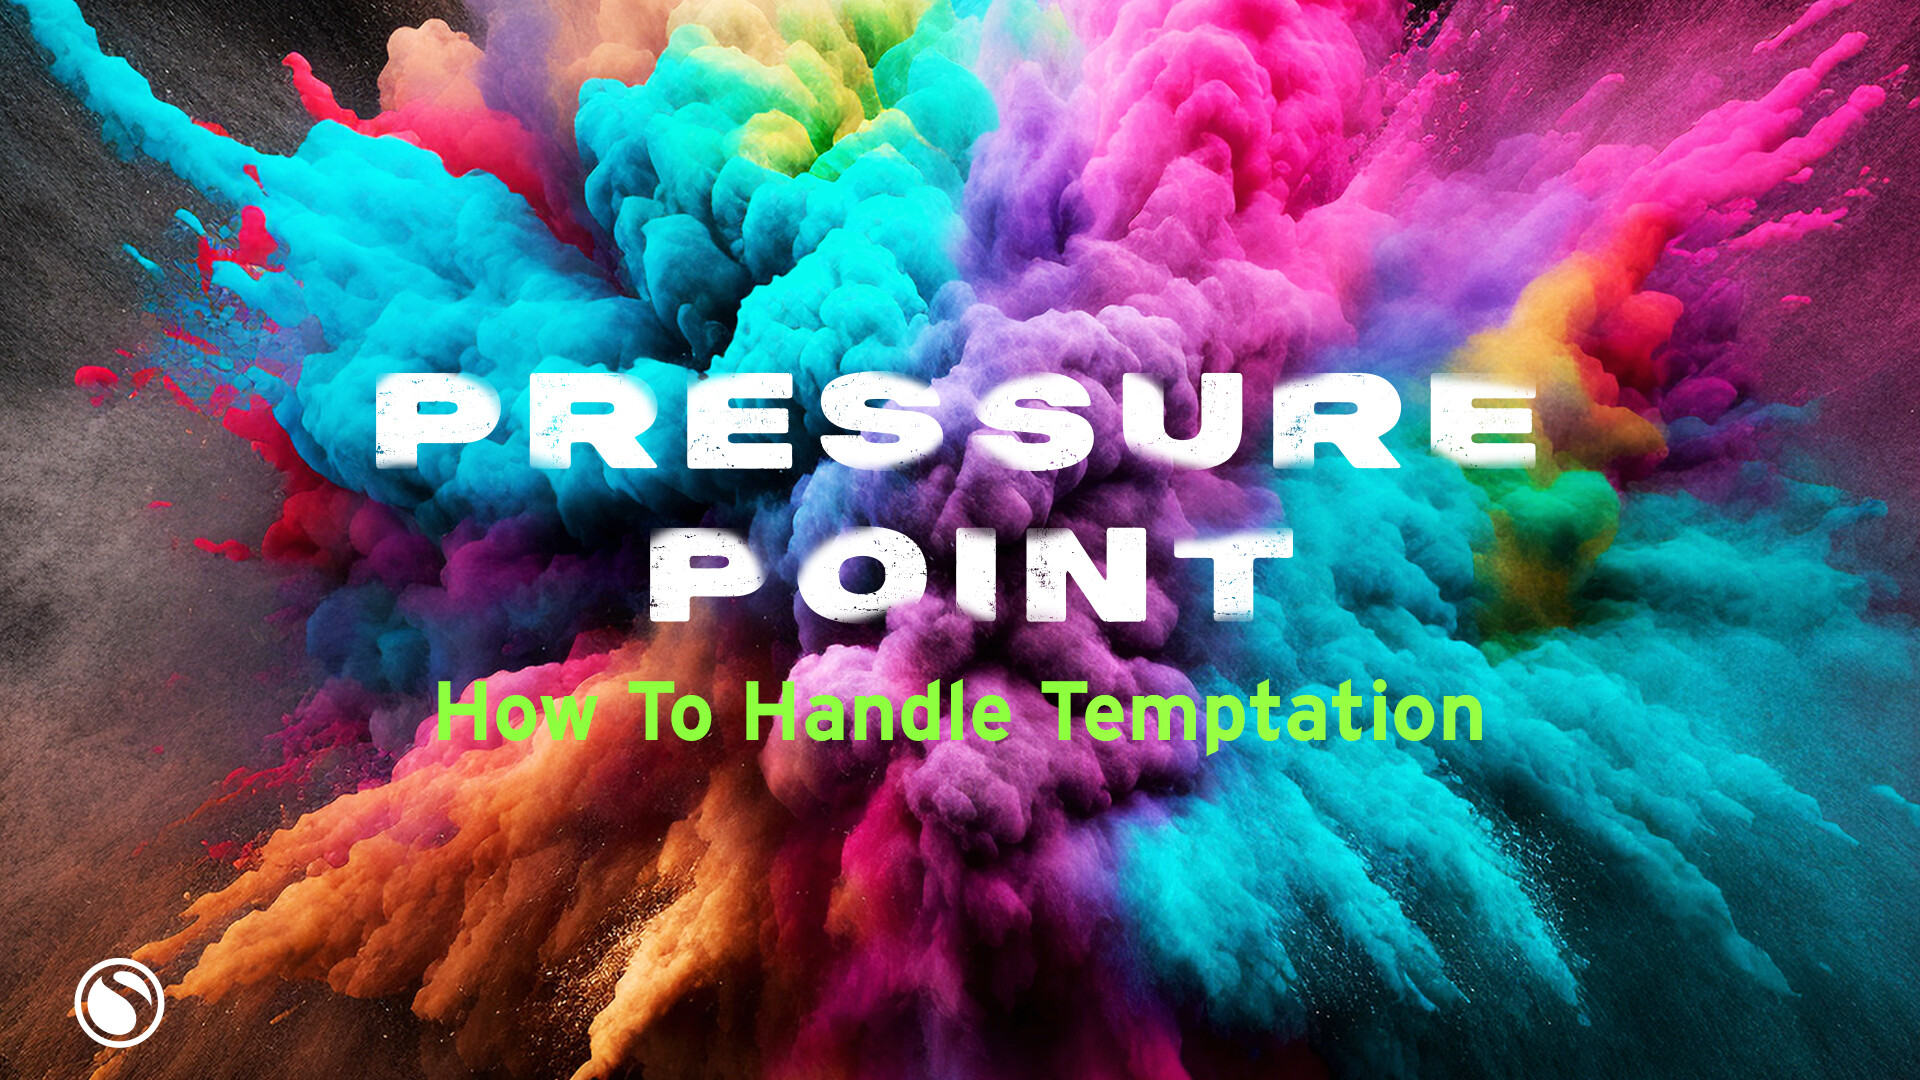 Watch Pressure Point - How To Handle Temptation